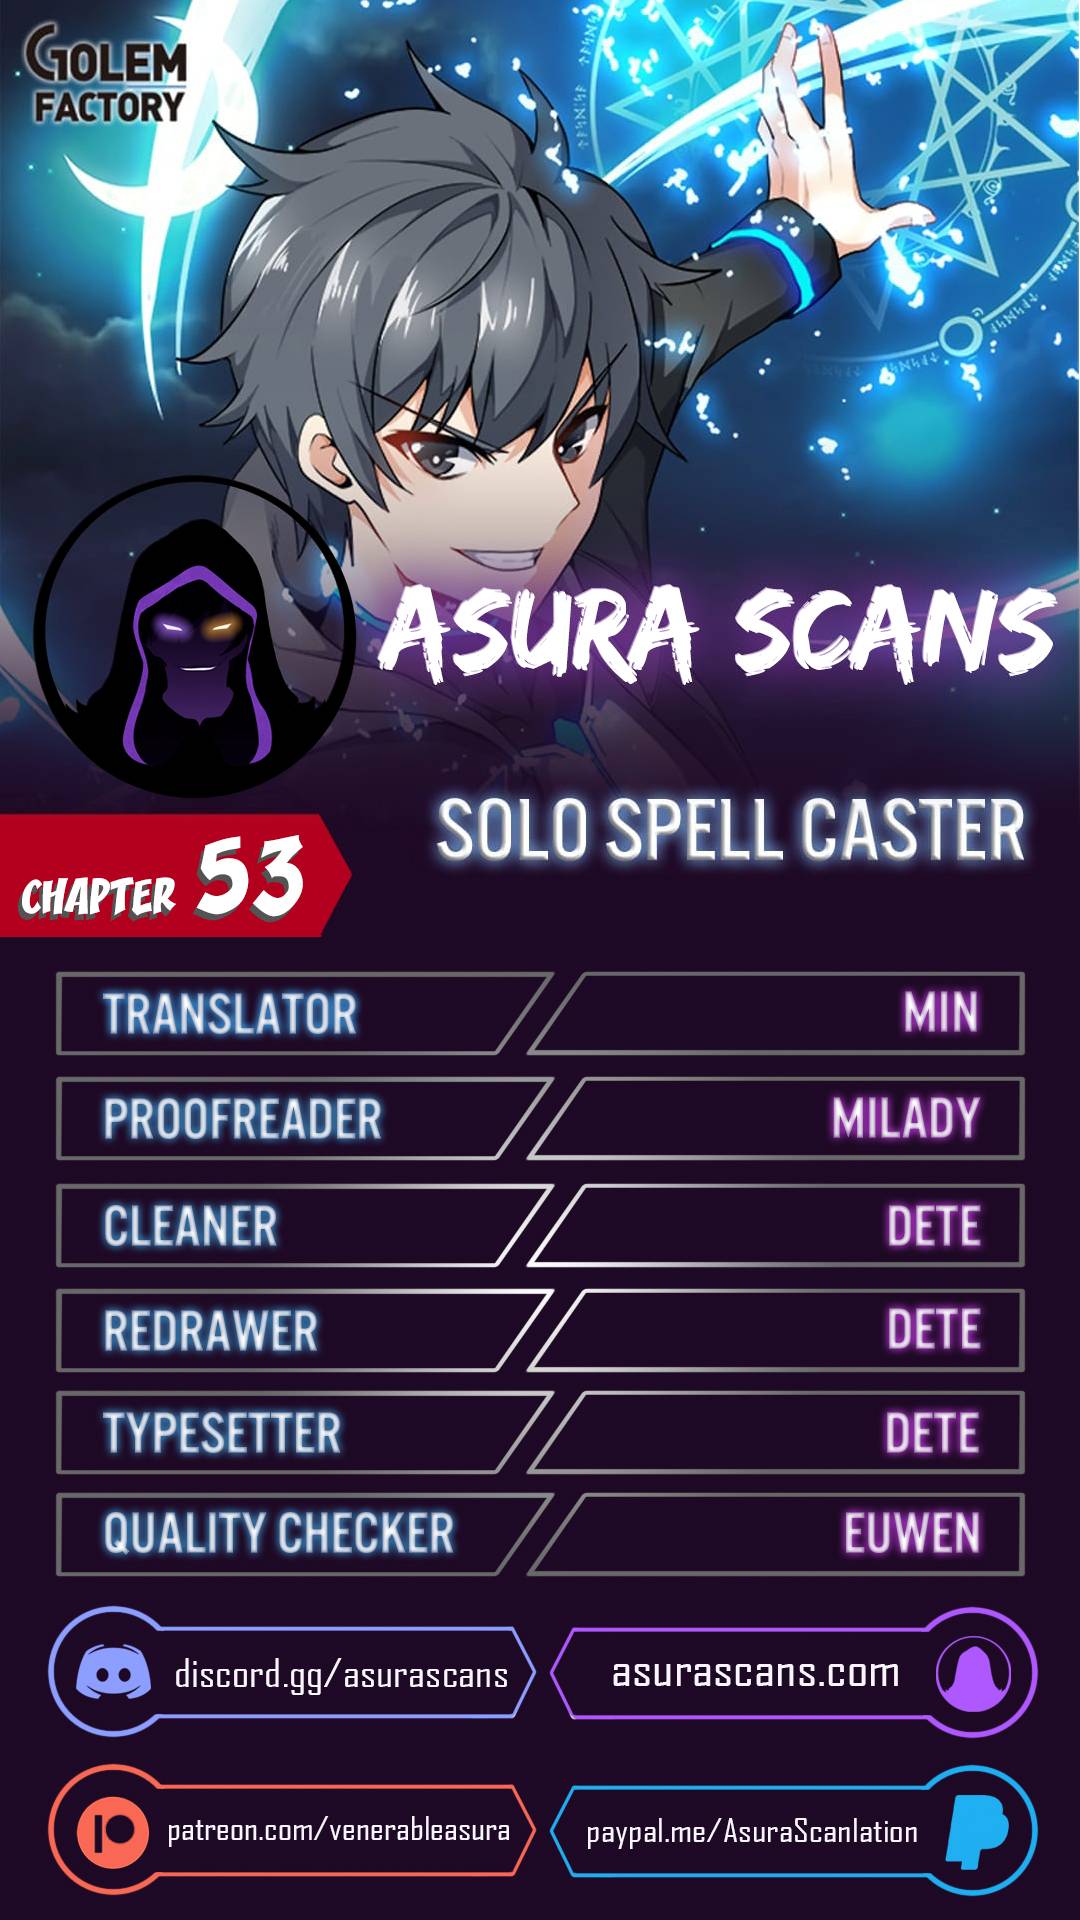 Solo Spell Caster Chapter 53